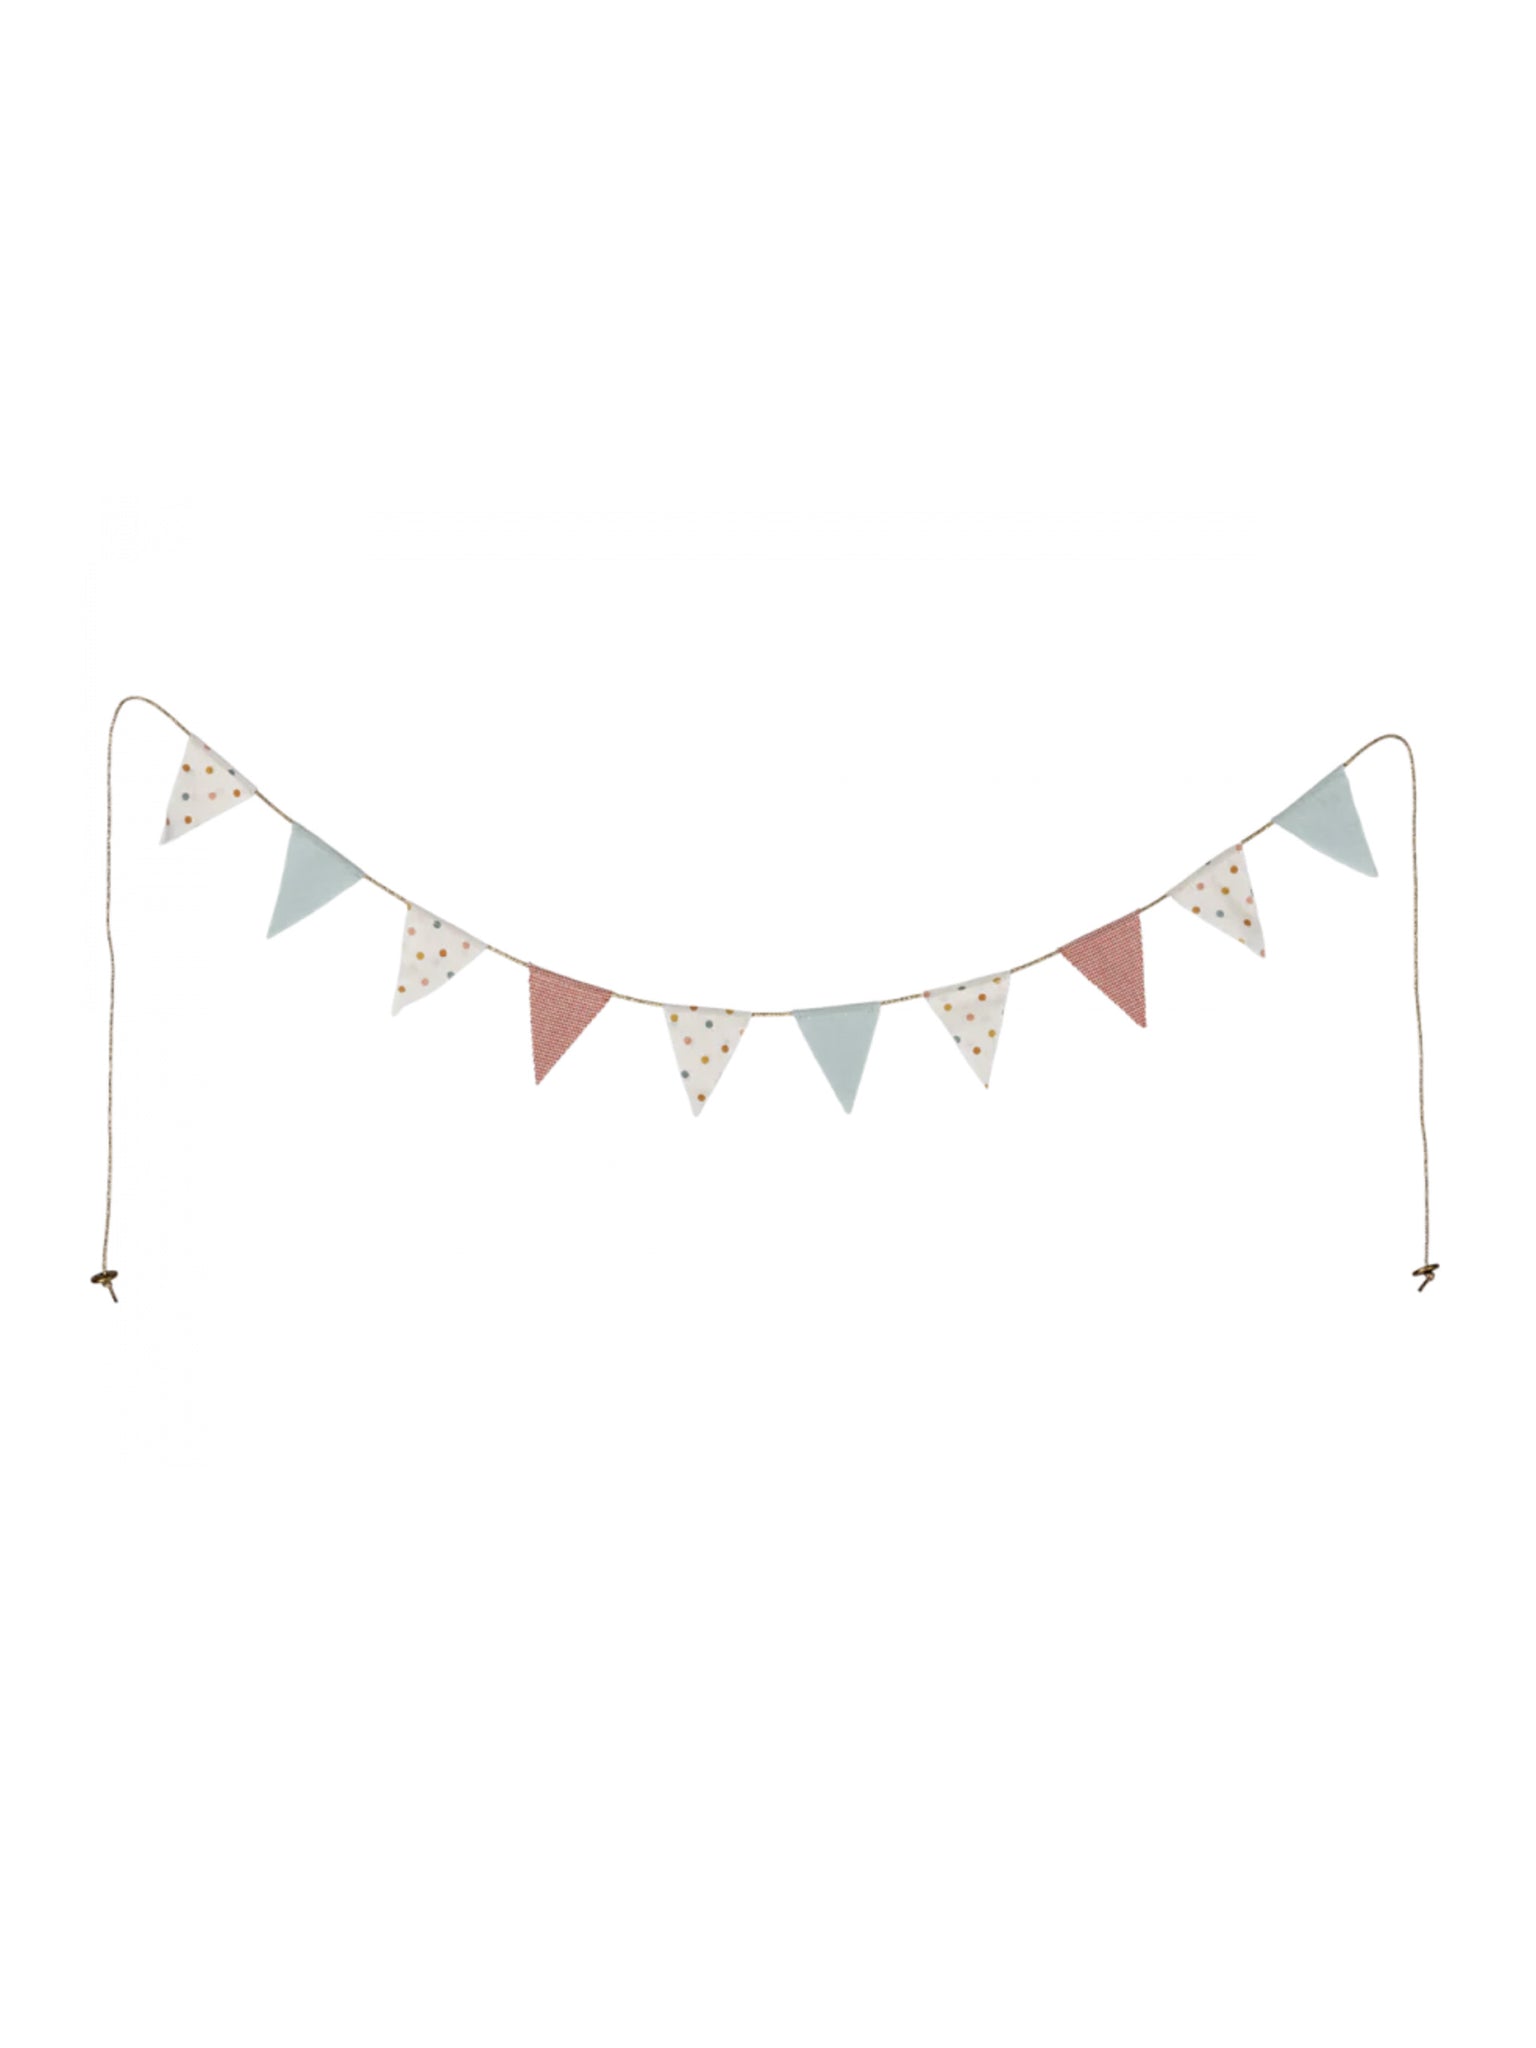 Maileg Small Garland 10 Flags Weston Table